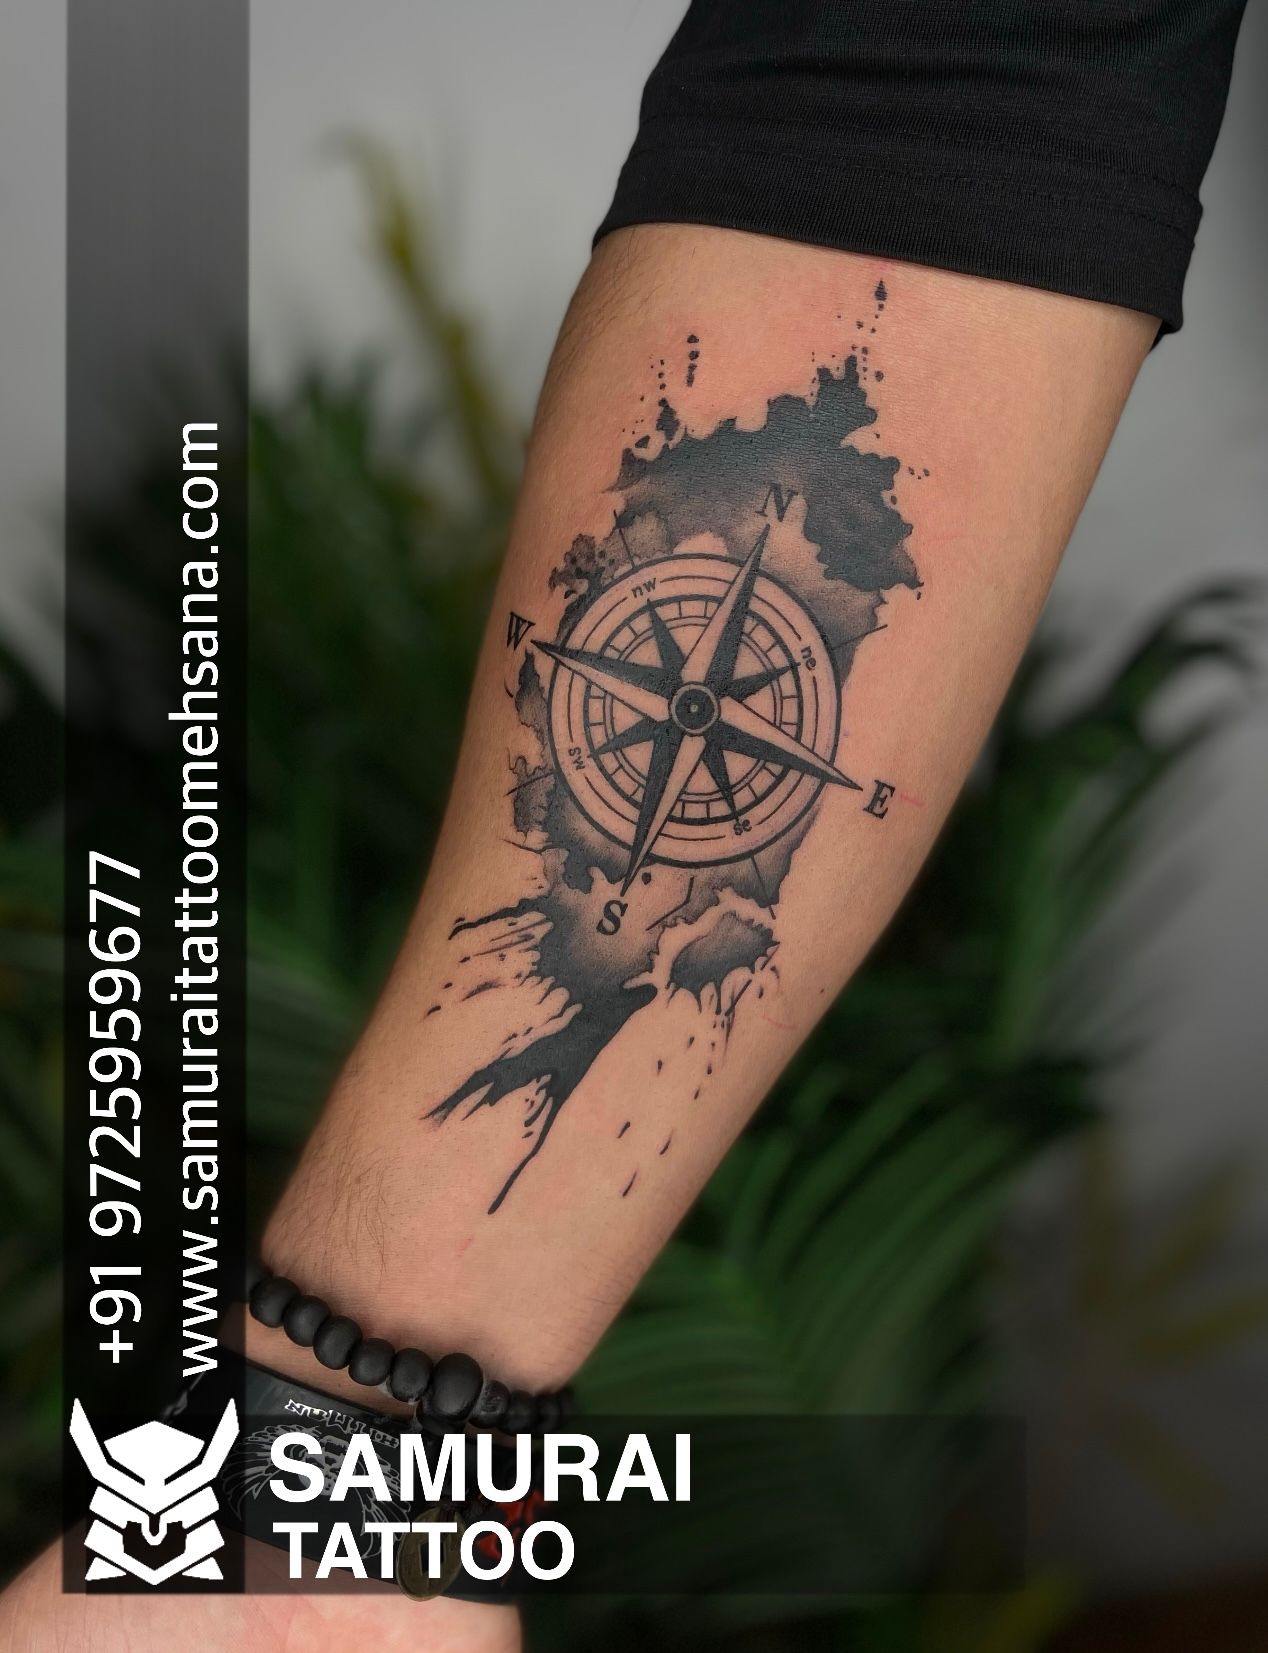 Flowers and compass tattoo on her arm | Joel Gordon Photography